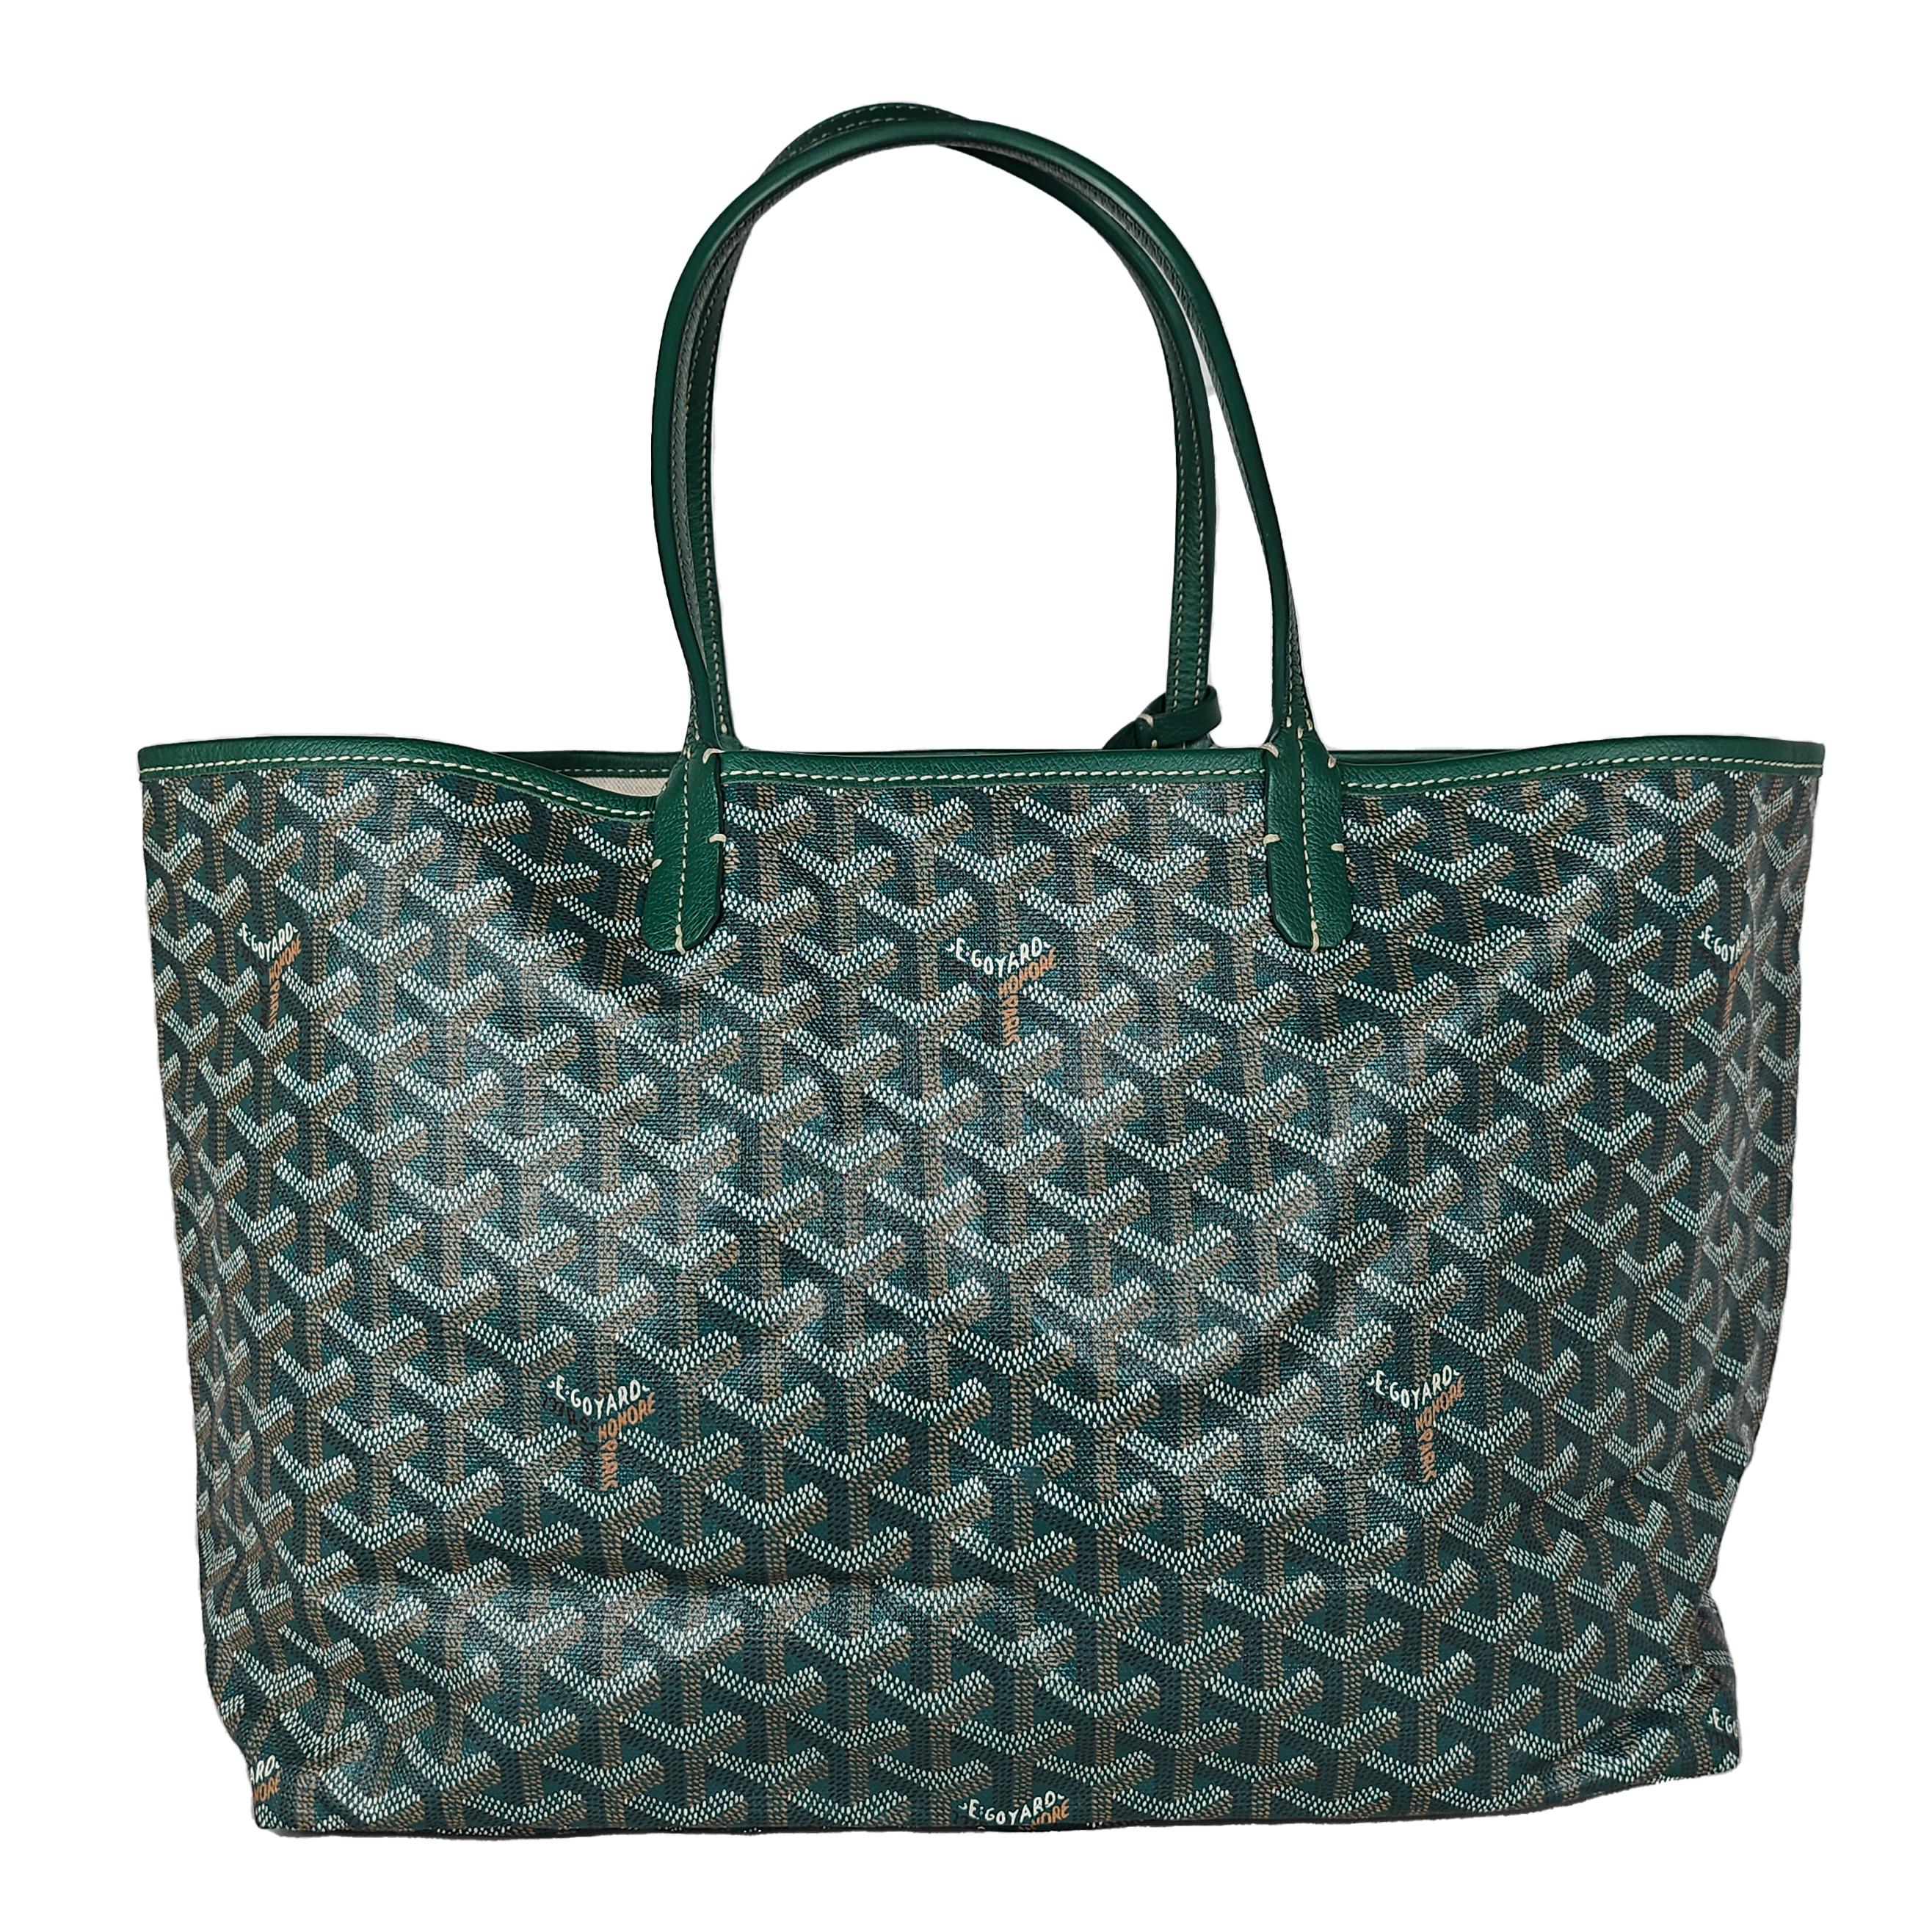 Condition: This authentic Goyard tote is in excellent pre-loved condition. There is faint interior staining and minor corner and trim wear.

No accessories included (dust bag, box, etc.)

Features: Sturdy leather strap handles, matching trim, an